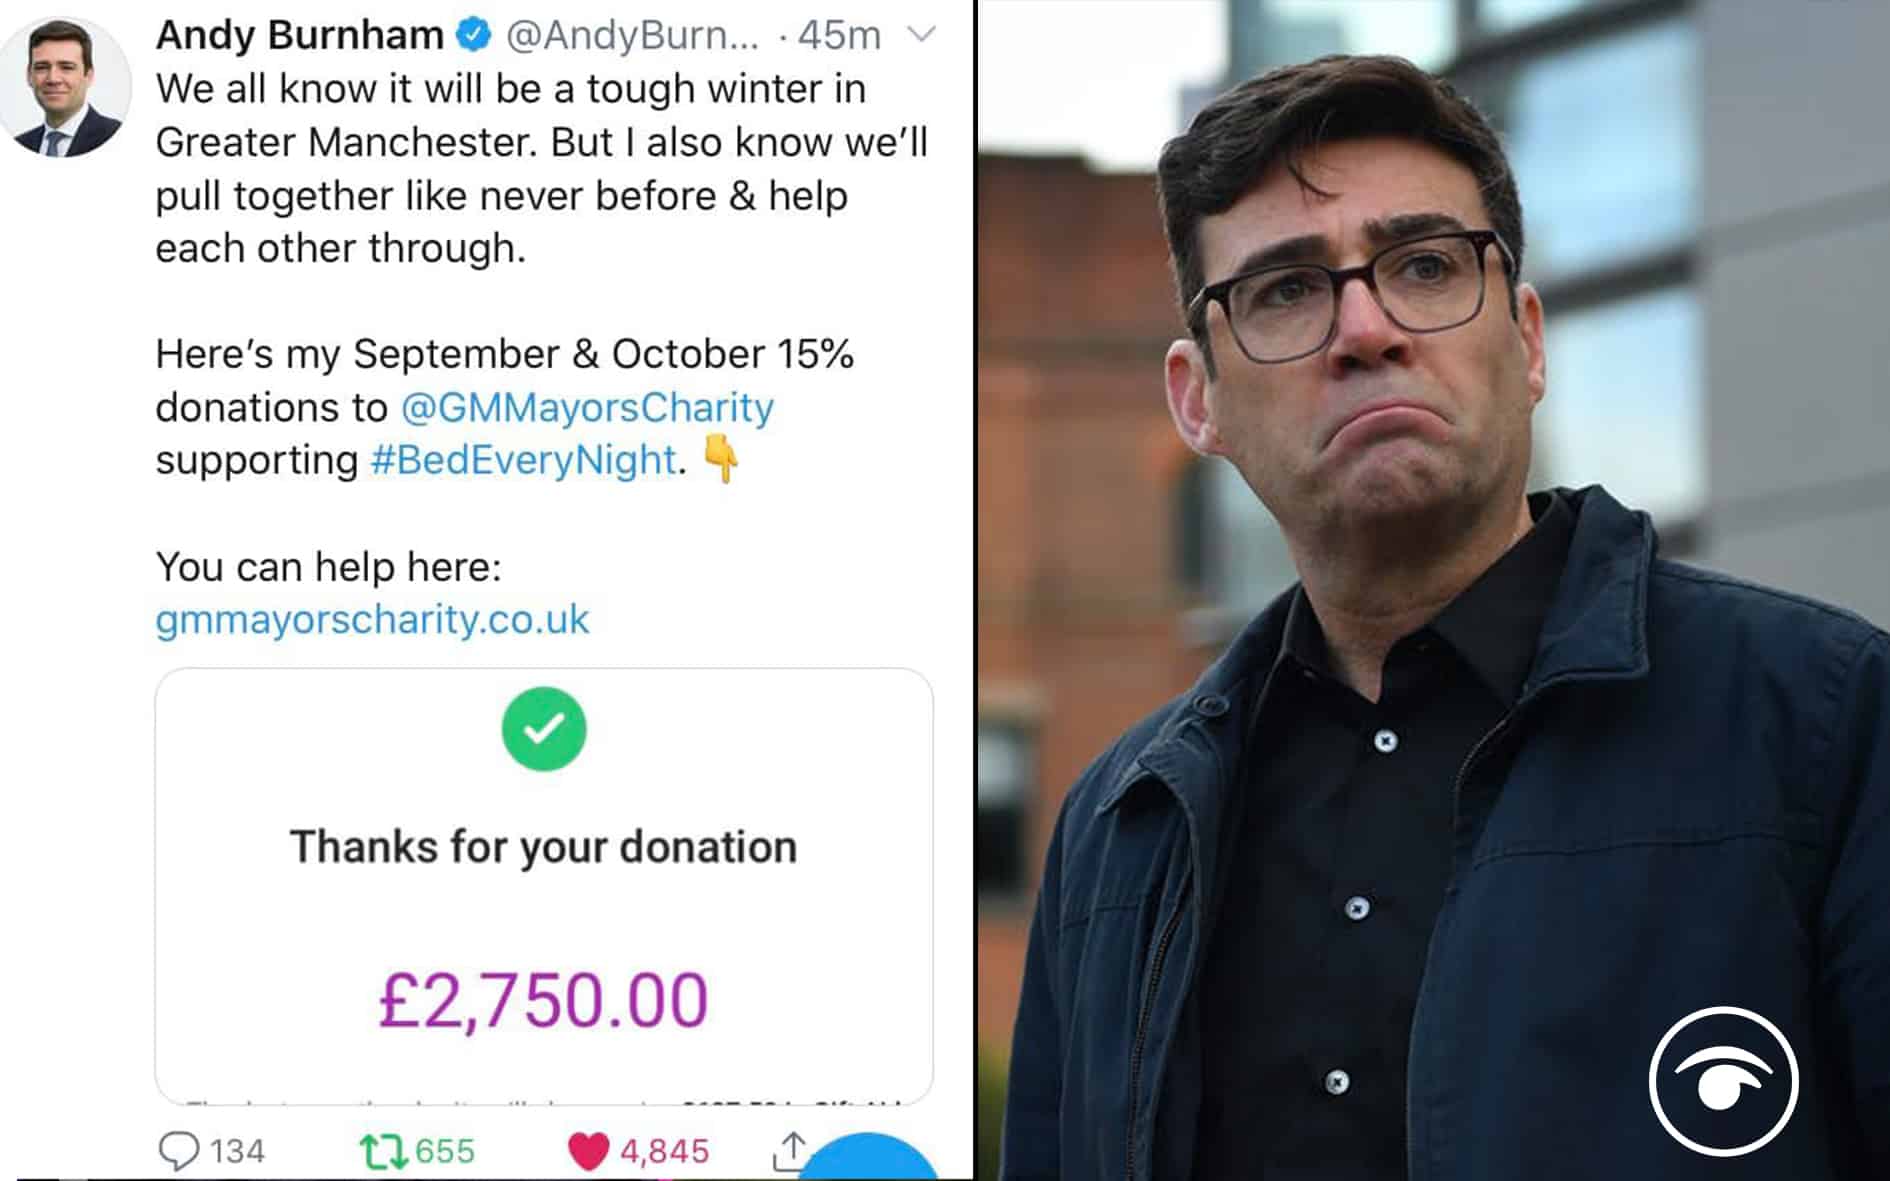 Reminder: That Andy Burnham has been donating 15% of his salary to charity since 2017